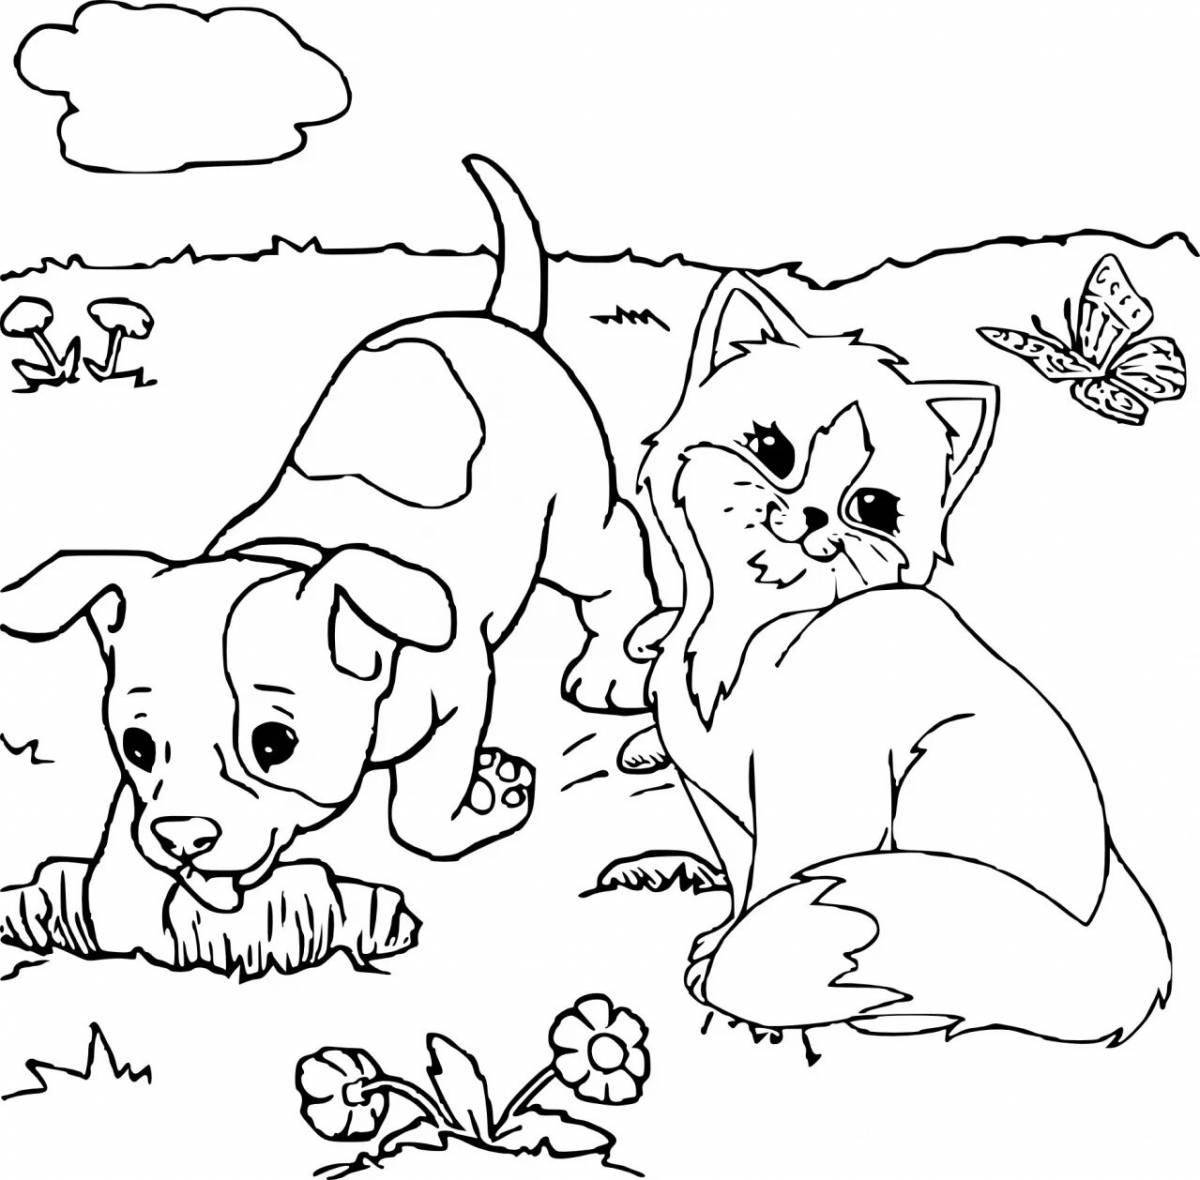 Amazing coloring pages of pets for kids